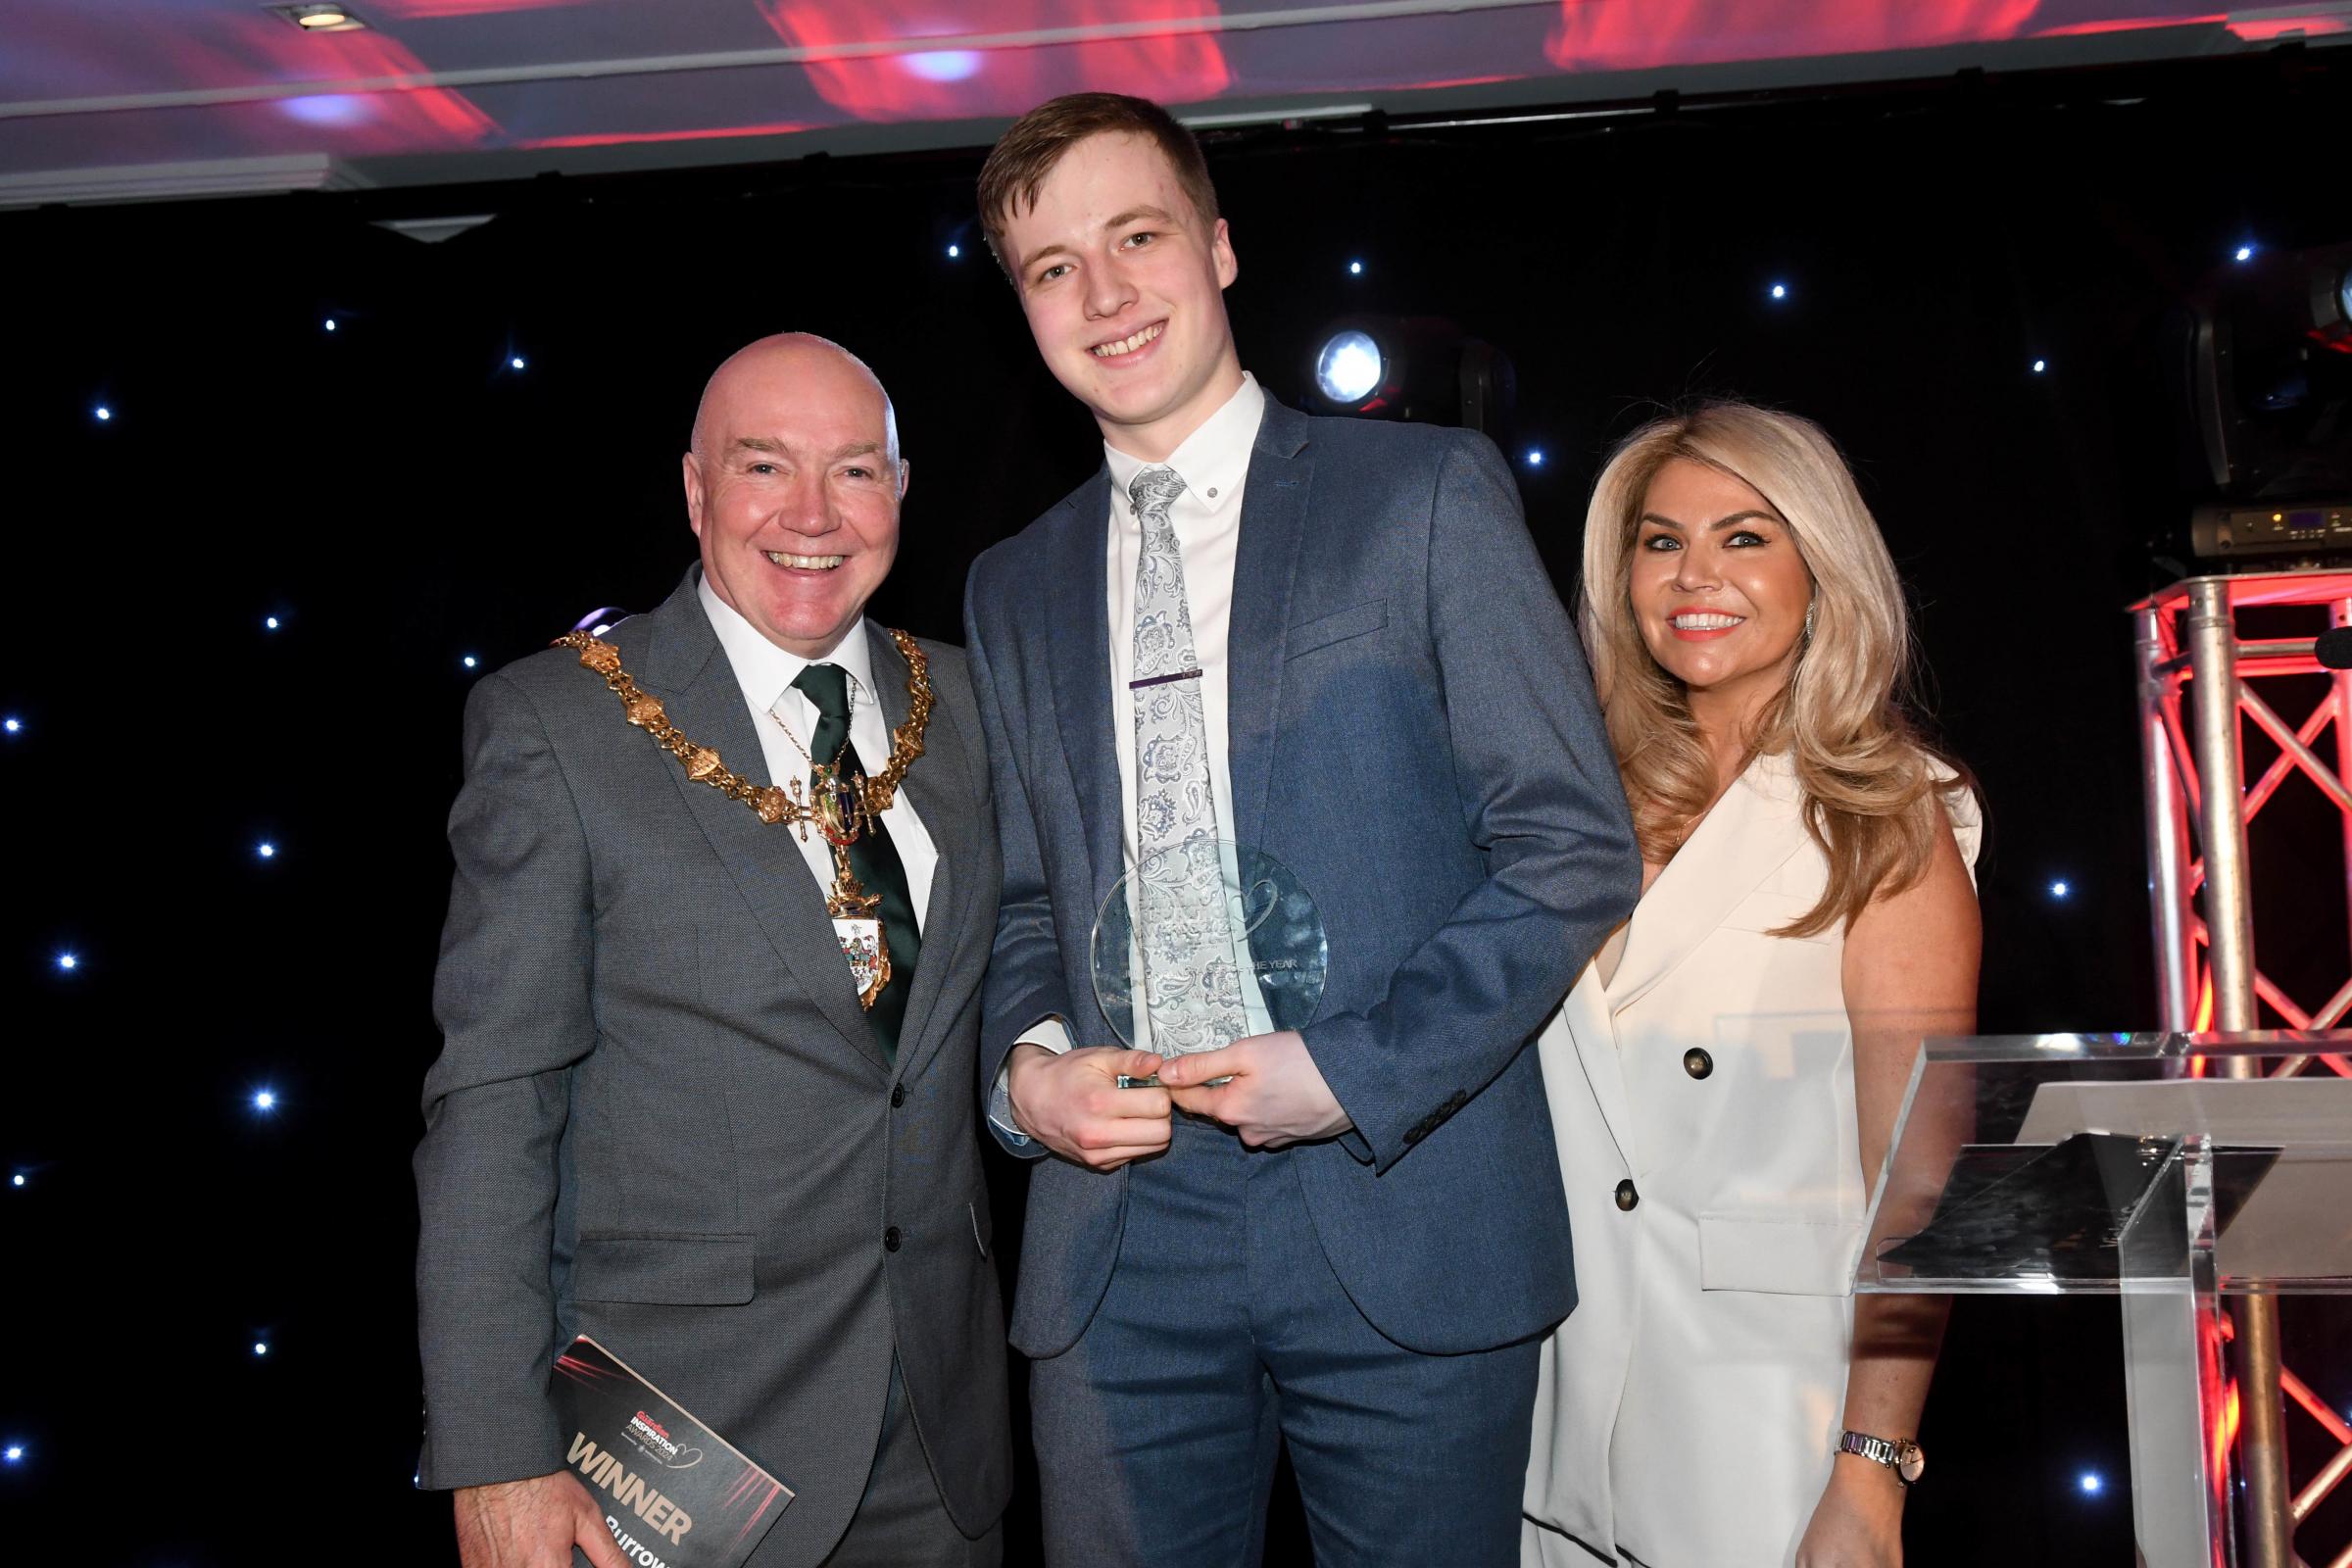 Junior Fundraiser of the Year Thomas Burrows with Leanne Campbell and Warrington mayor Cllr Steve Wright